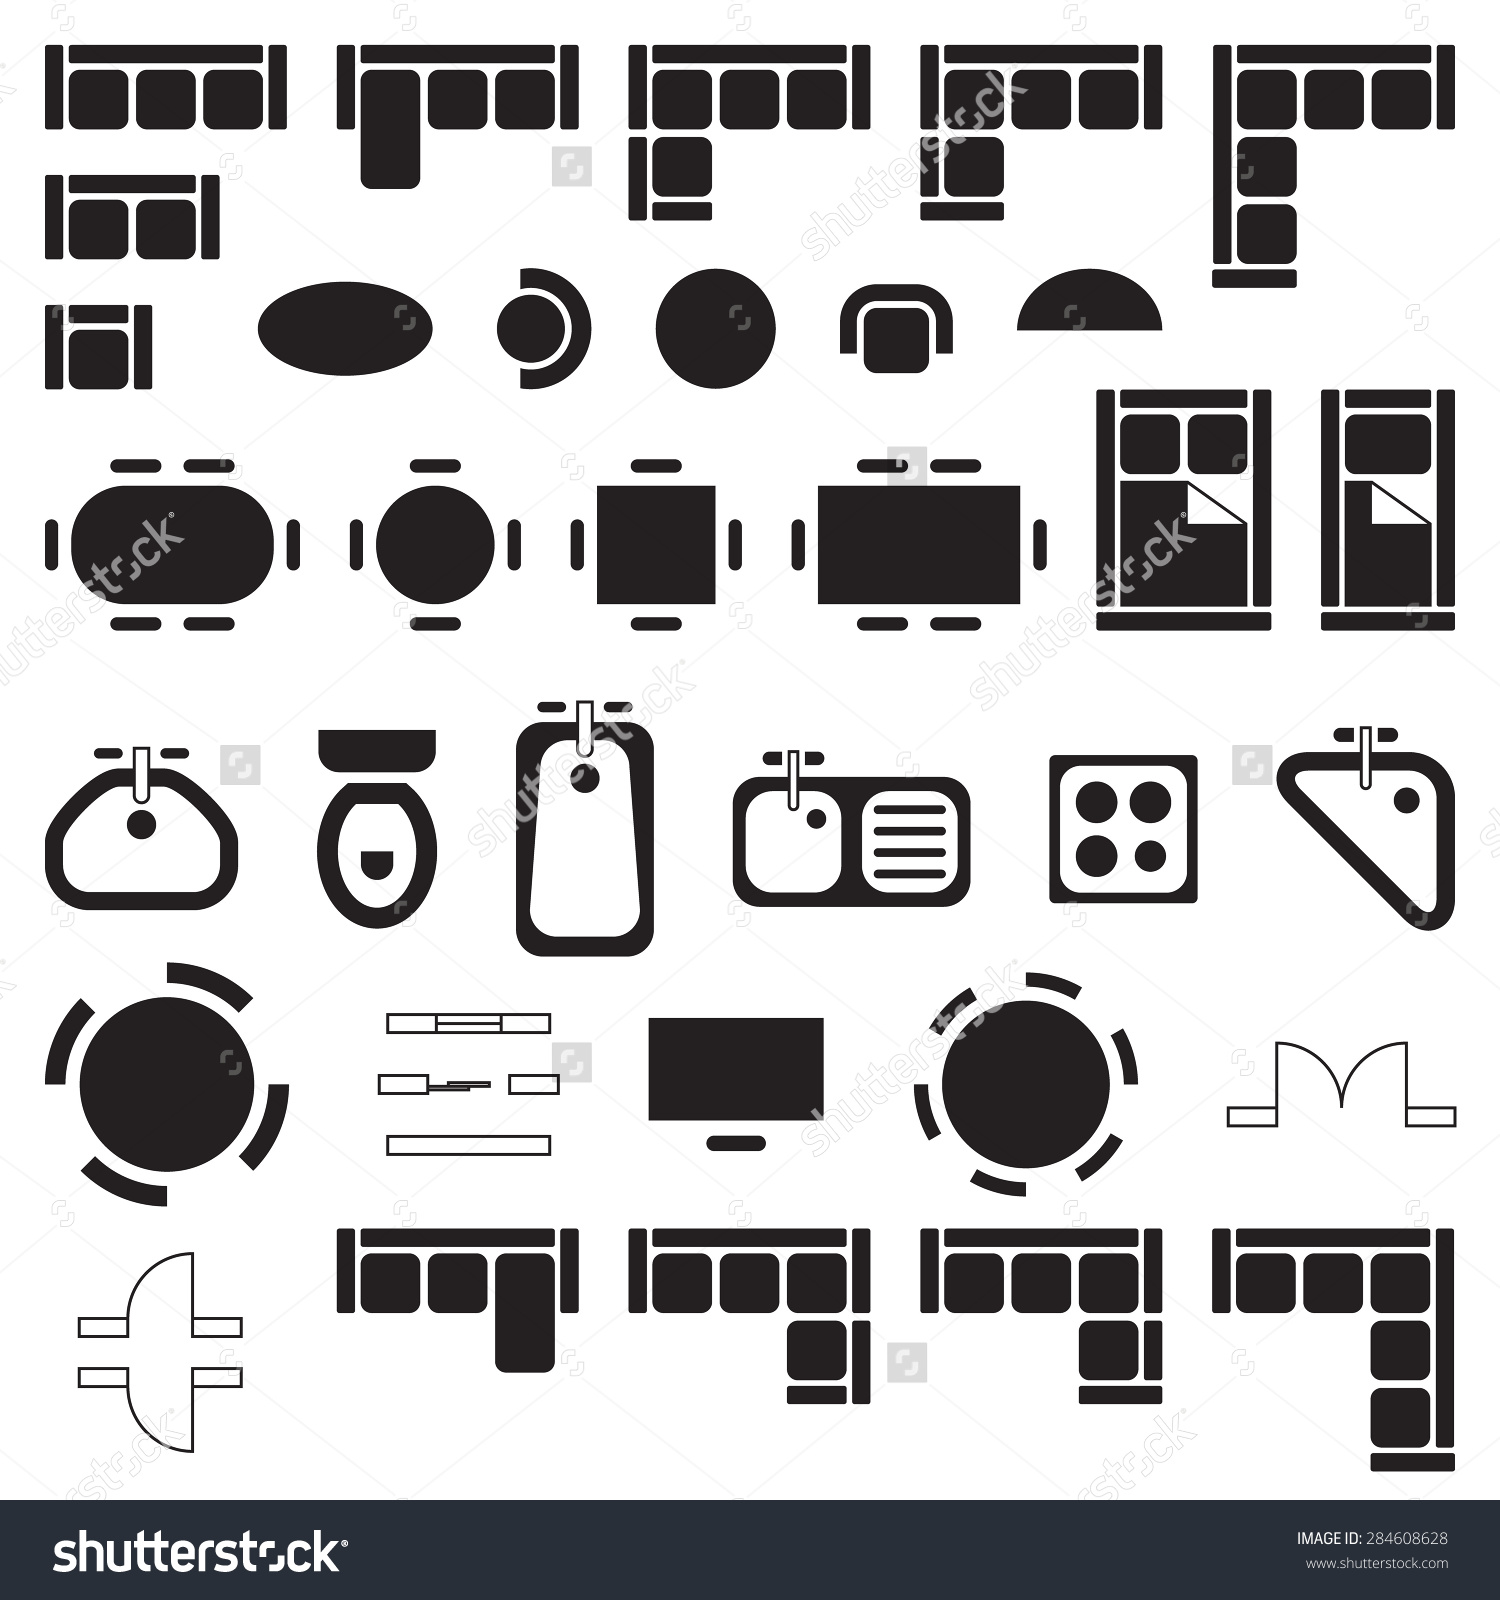 Architectural icons clipart.